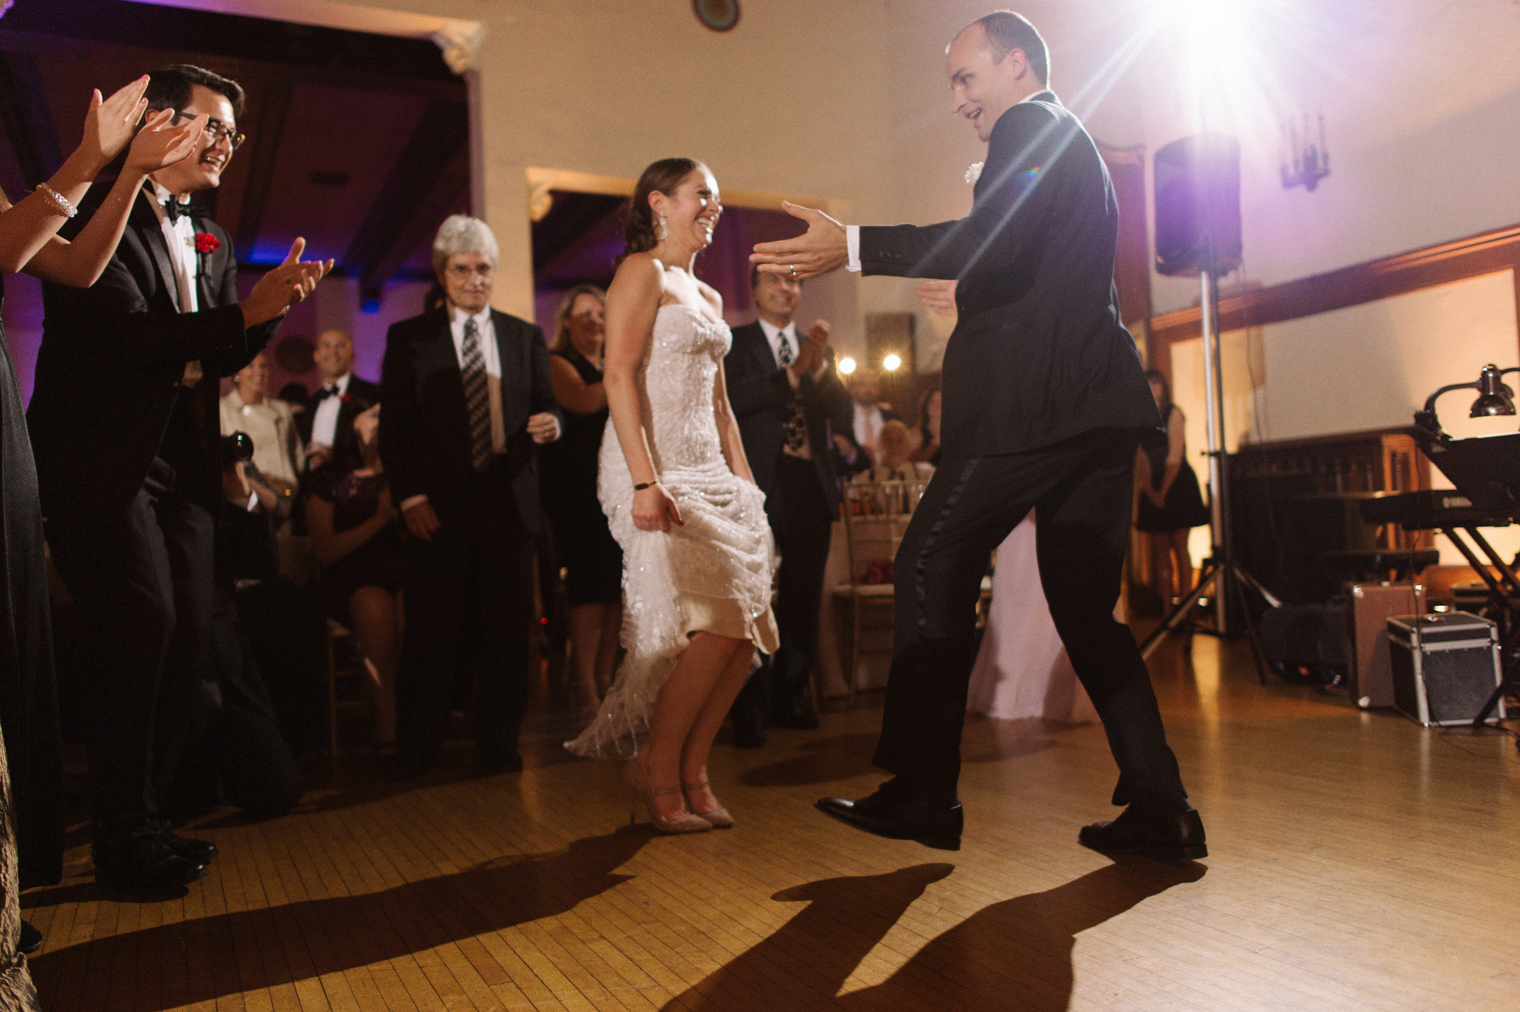 The bride, groom, and guests do traditional Ukrainian dances at a Detroit Yacht Club wedding by Michigan Photographer Heather Jowett.